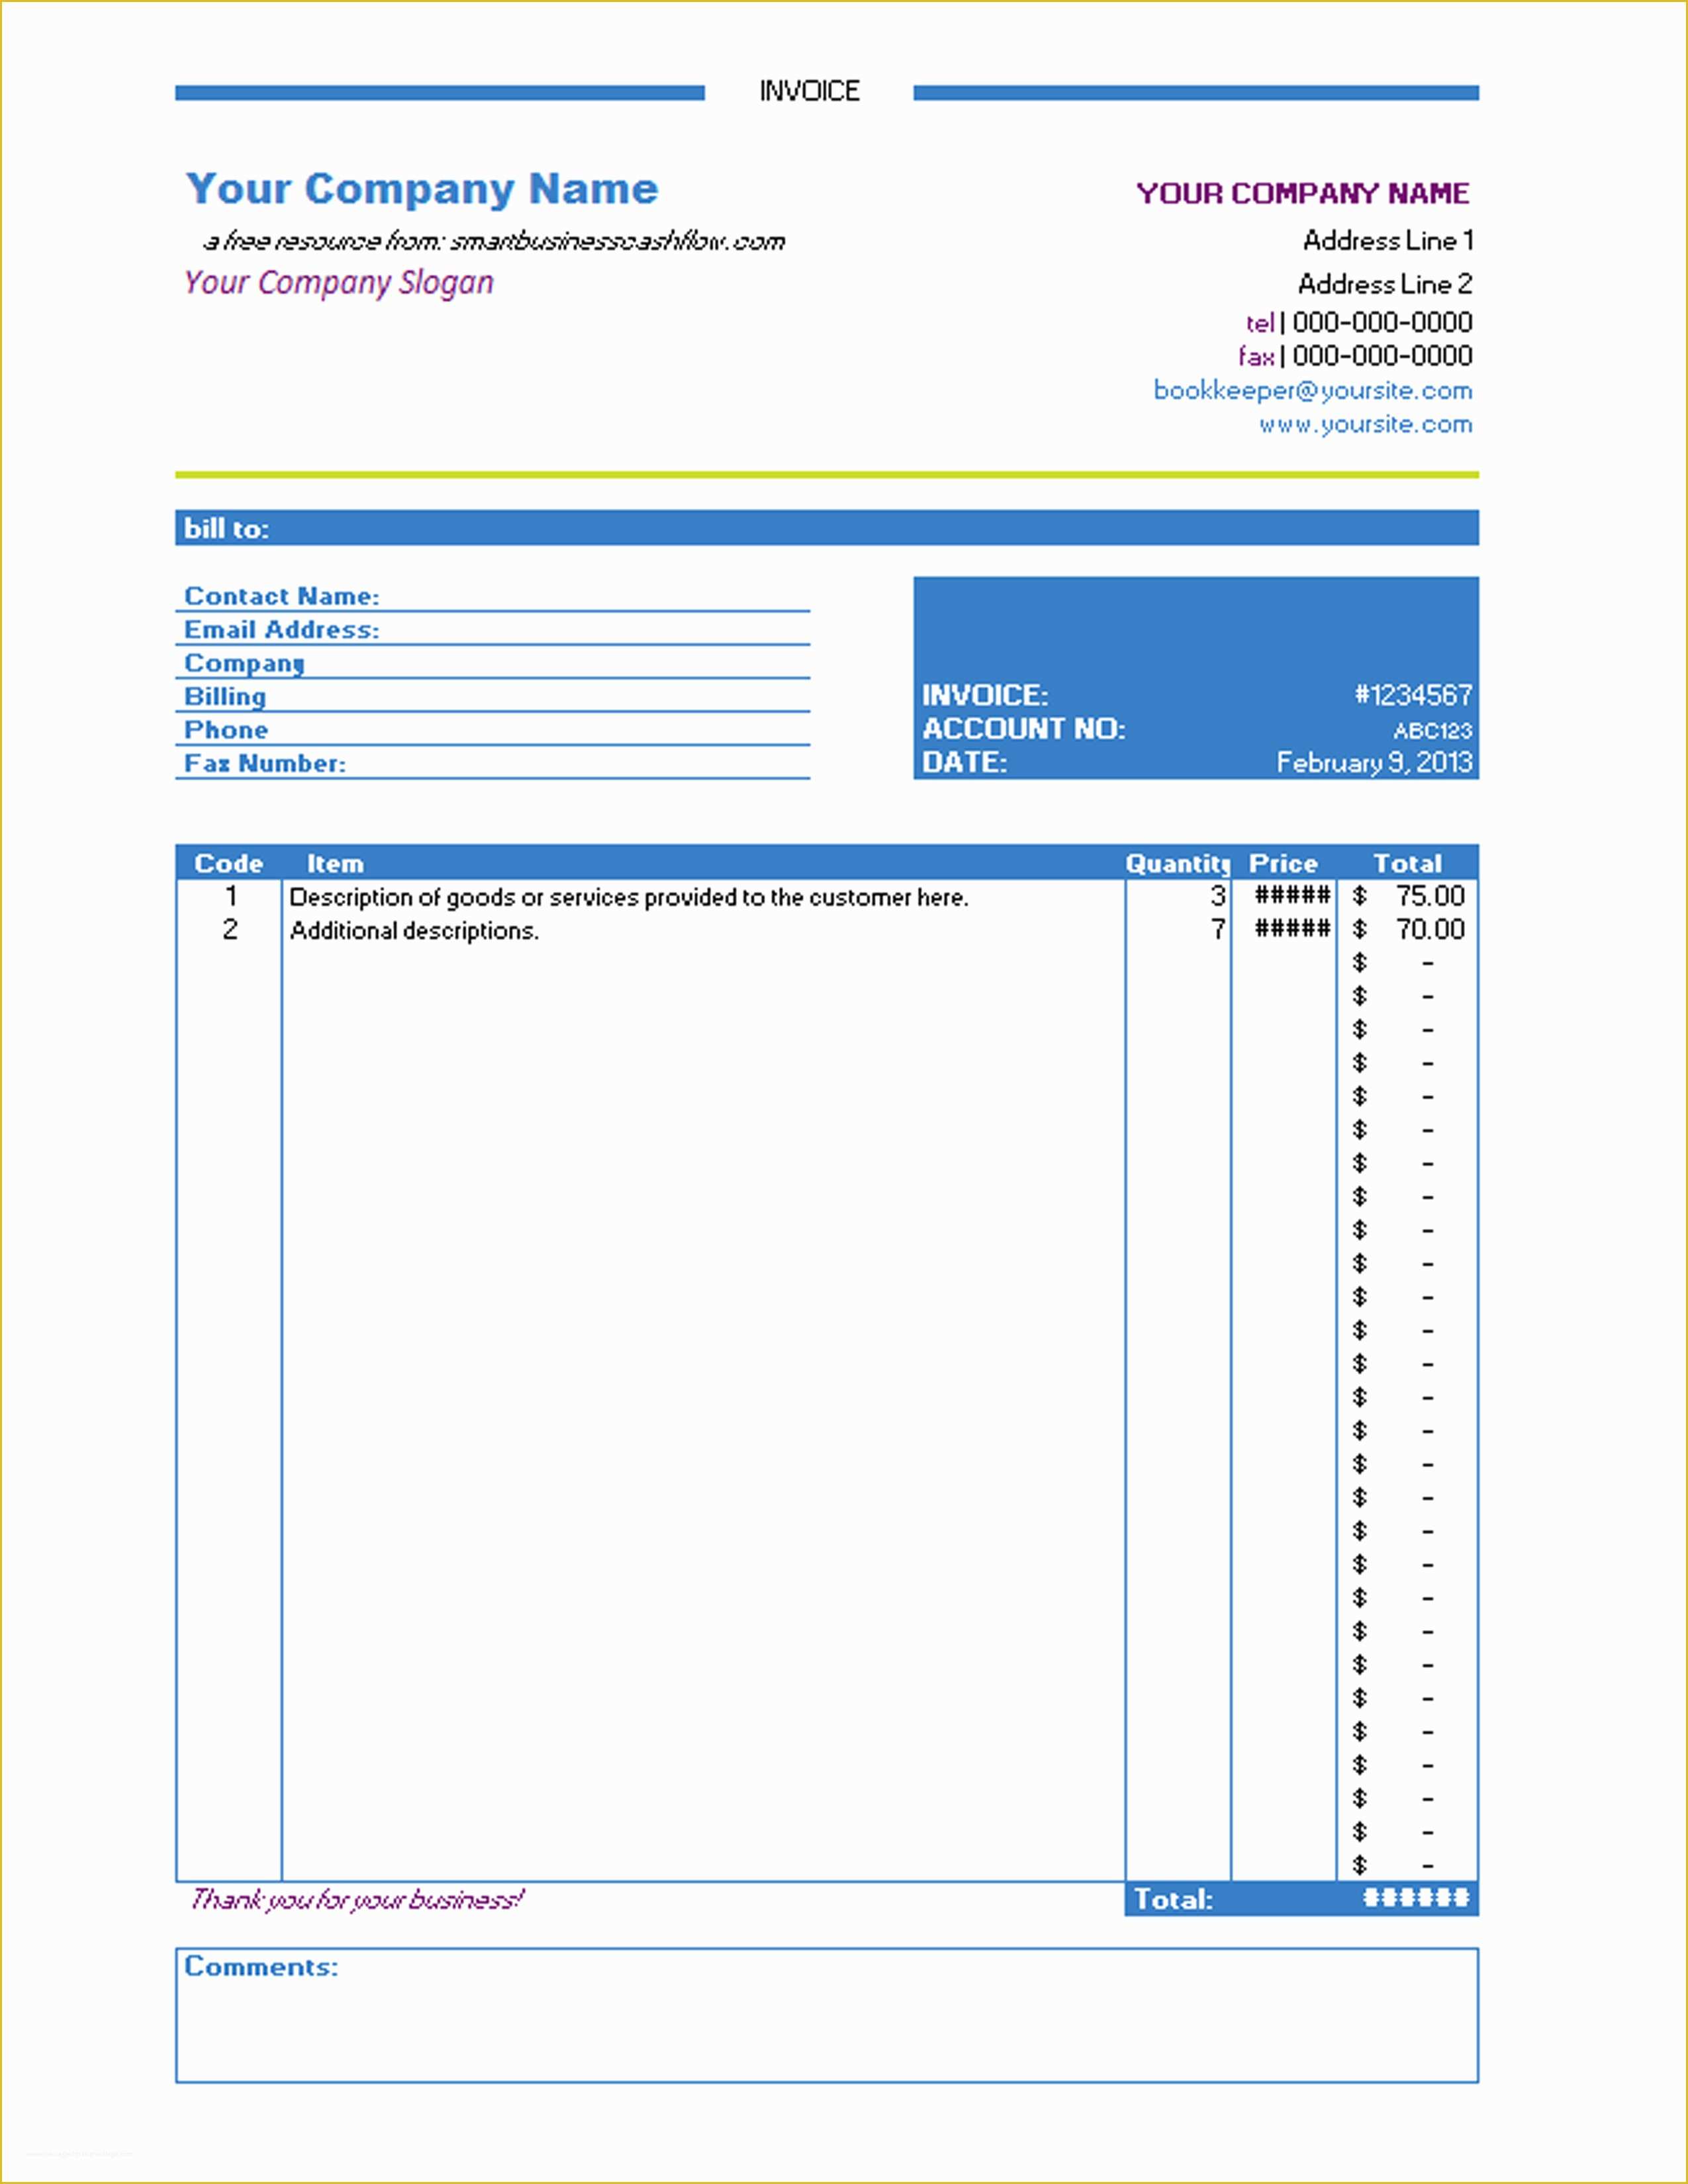 Basic Invoice Template Free Of Subcontractor Invoice Template Excel